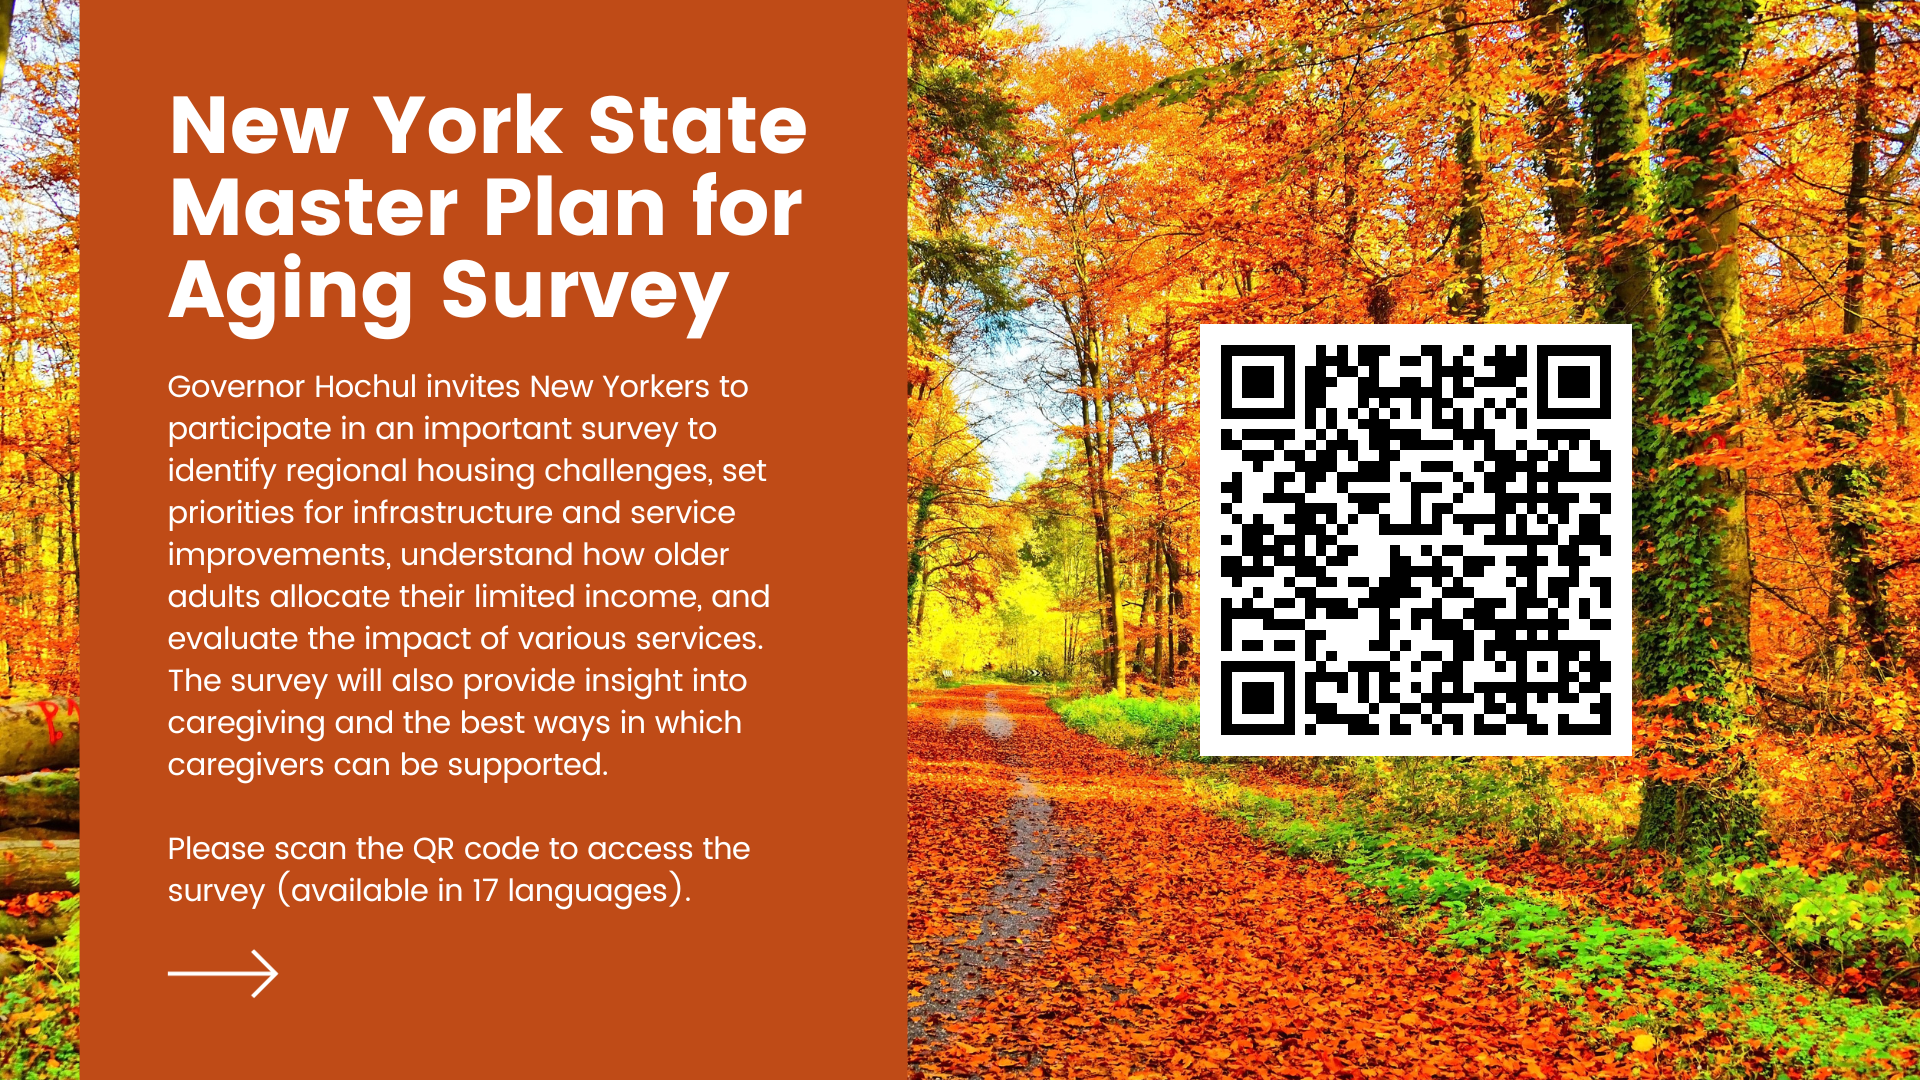 New York State Master Plan for Aging Survey Governor Hochul invites New Yorkers to participate in an important survey to identify regional housing challenges, set priorities for infrastructure and service improvements, understand how older adults allocate their limited income, and evaluate the impact of various services. The survey will also provide insight into caregiving and the best ways in which caregivers can be supported. 

Please visit the survey (available in 17 languages) at https://www.ny.gov/new-york.../master-plan-aging-survey.
